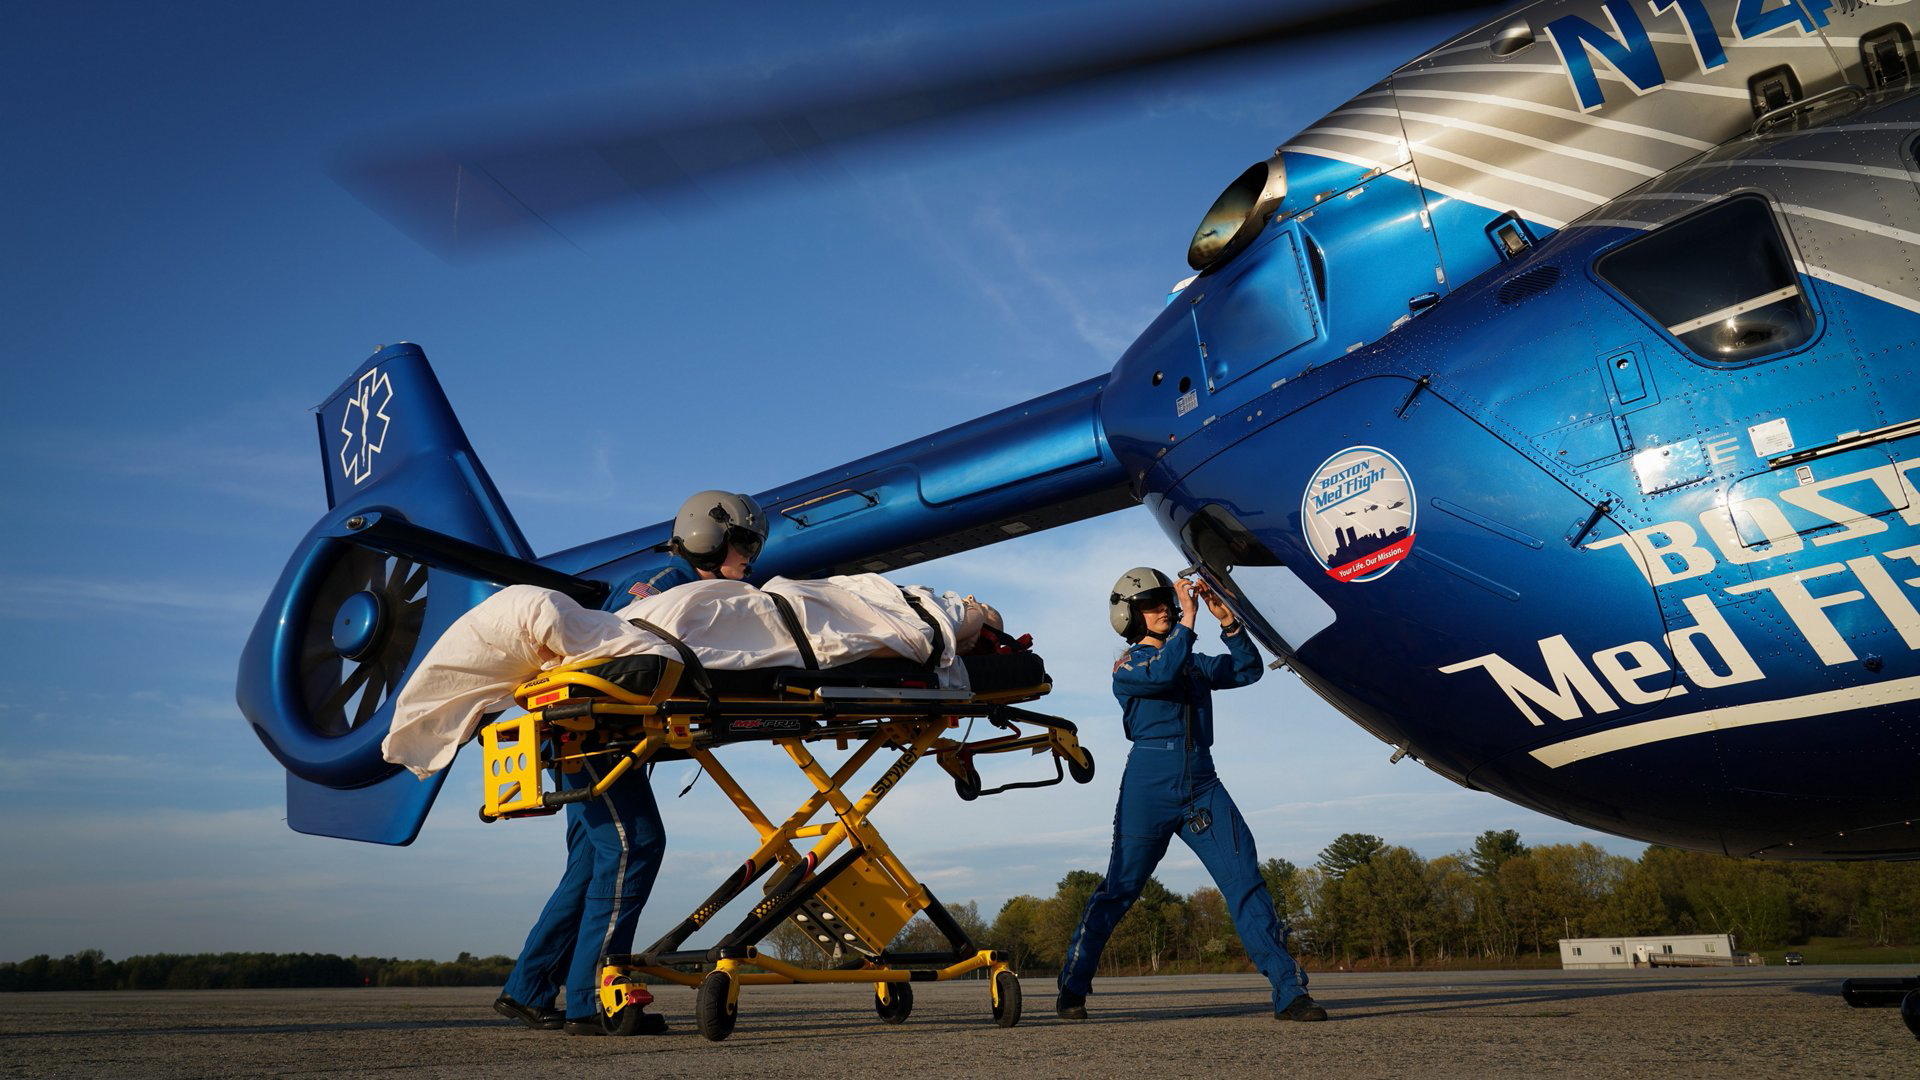 Airbus Helicopters is expanding its presence in the North American emergency medical services (EMS) market with the sale of six helicopters to two customers at the 2018 Air Medical Transport Conference, which took place in Phoenix, Arizona last week. Click to enlarge.